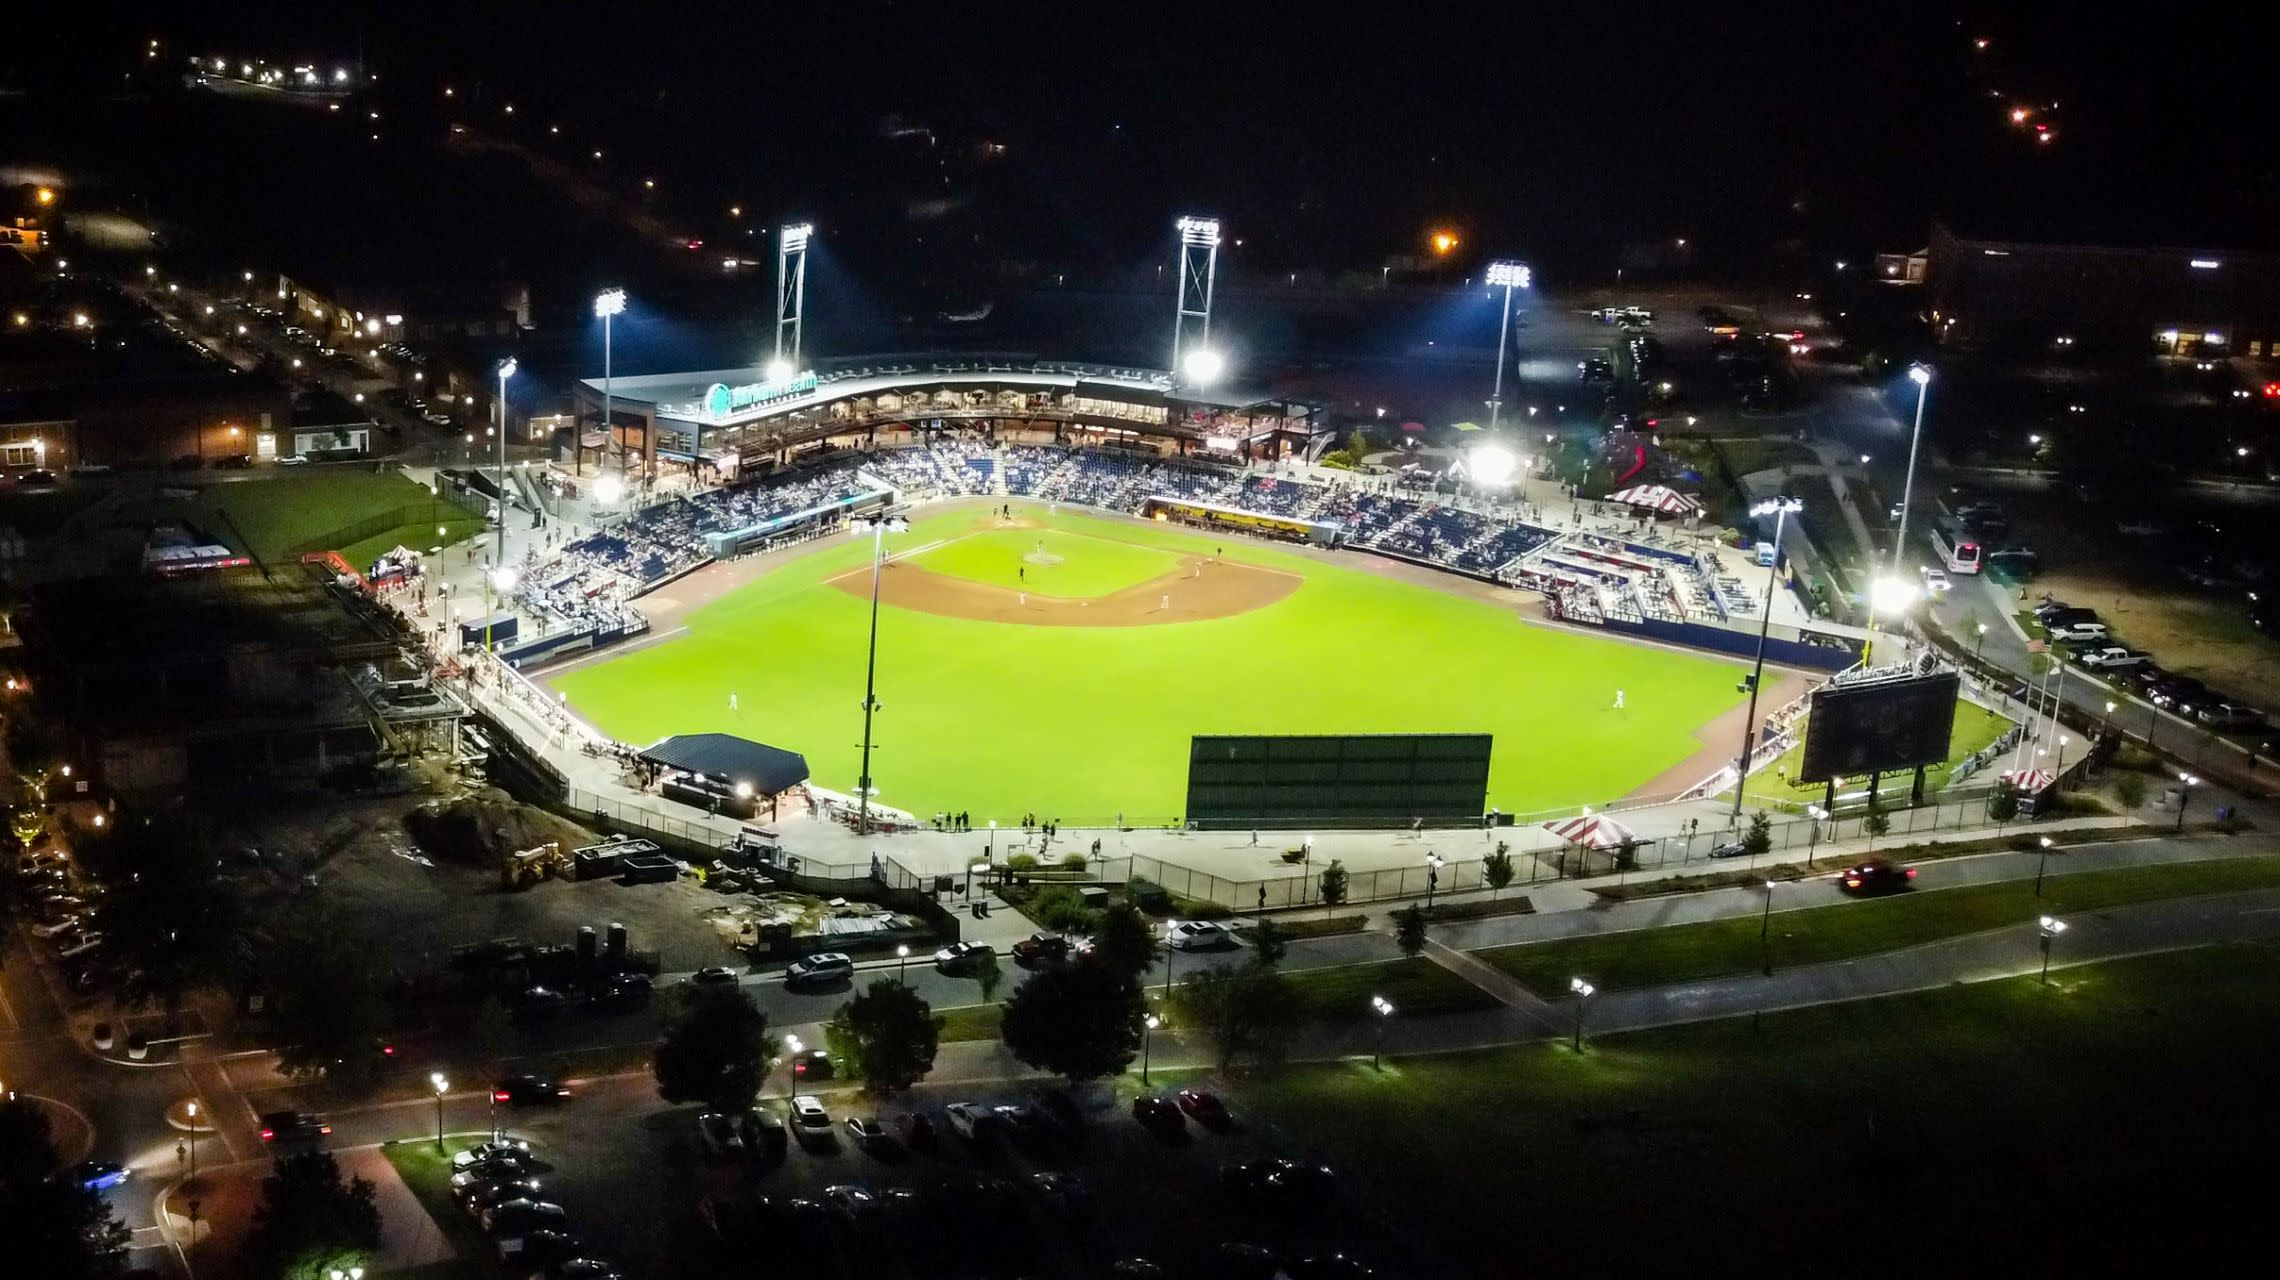 aerial view of ballpark